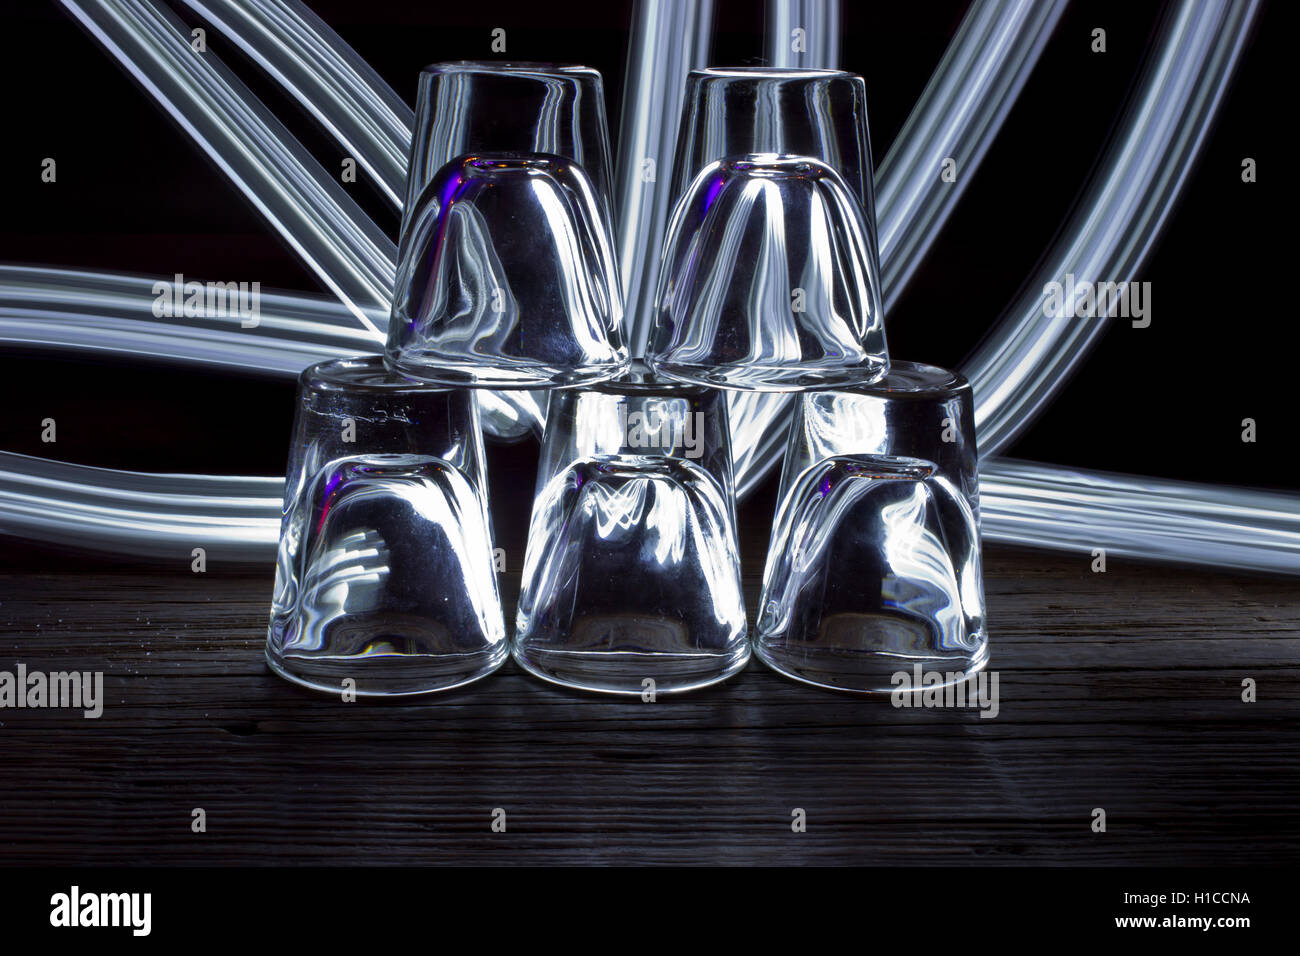 https://c8.alamy.com/comp/H1CCNA/shot-glasses-in-pyramid-with-light-drawing-H1CCNA.jpg